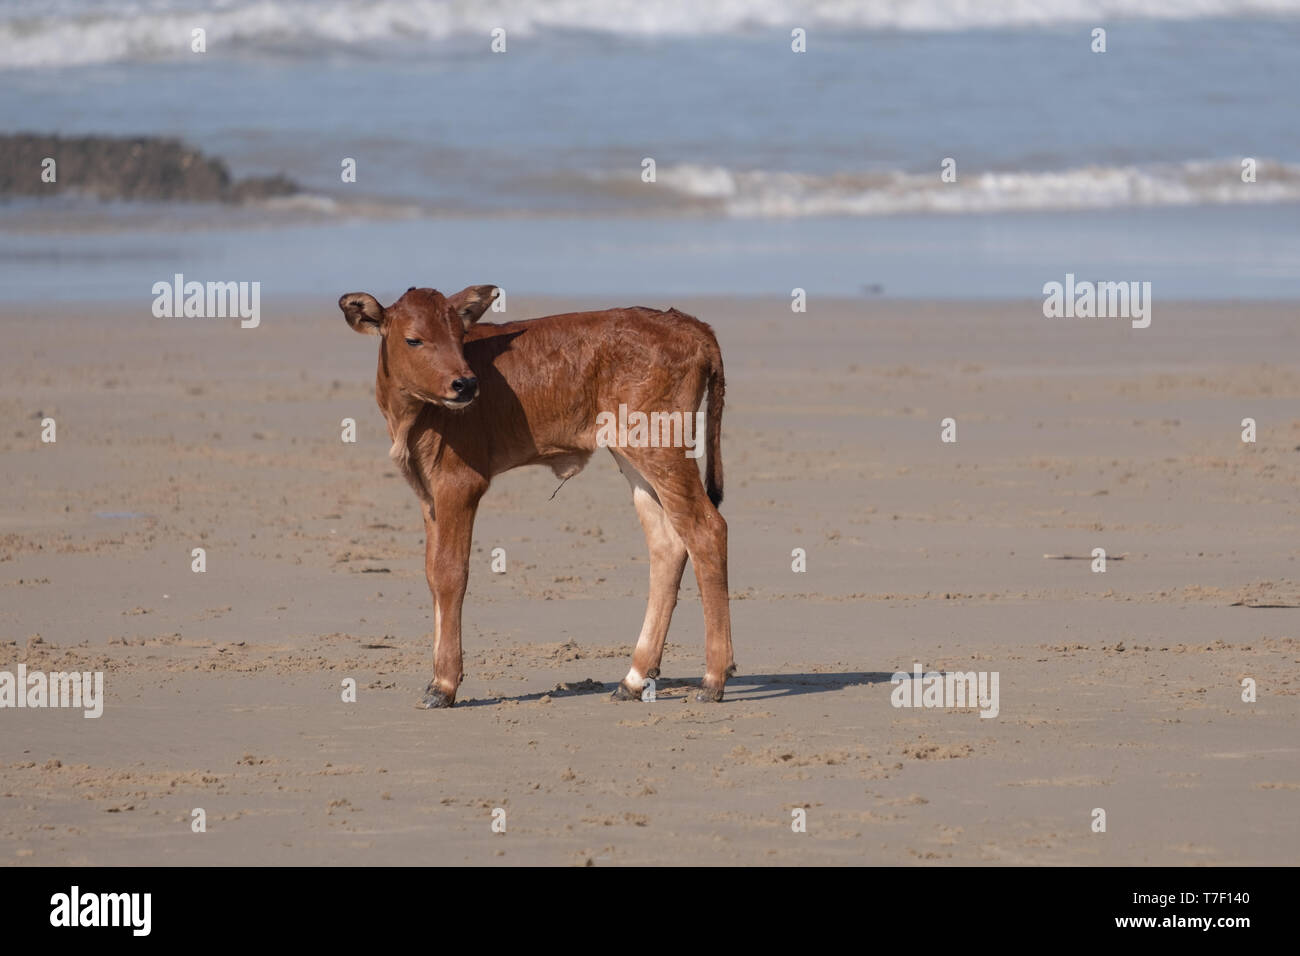 Nguni cow on the sand at Second Beach, Port St Johns on the wild coast in Transkei, South Africa. The local cows come down to the beach to cool off. Stock Photo